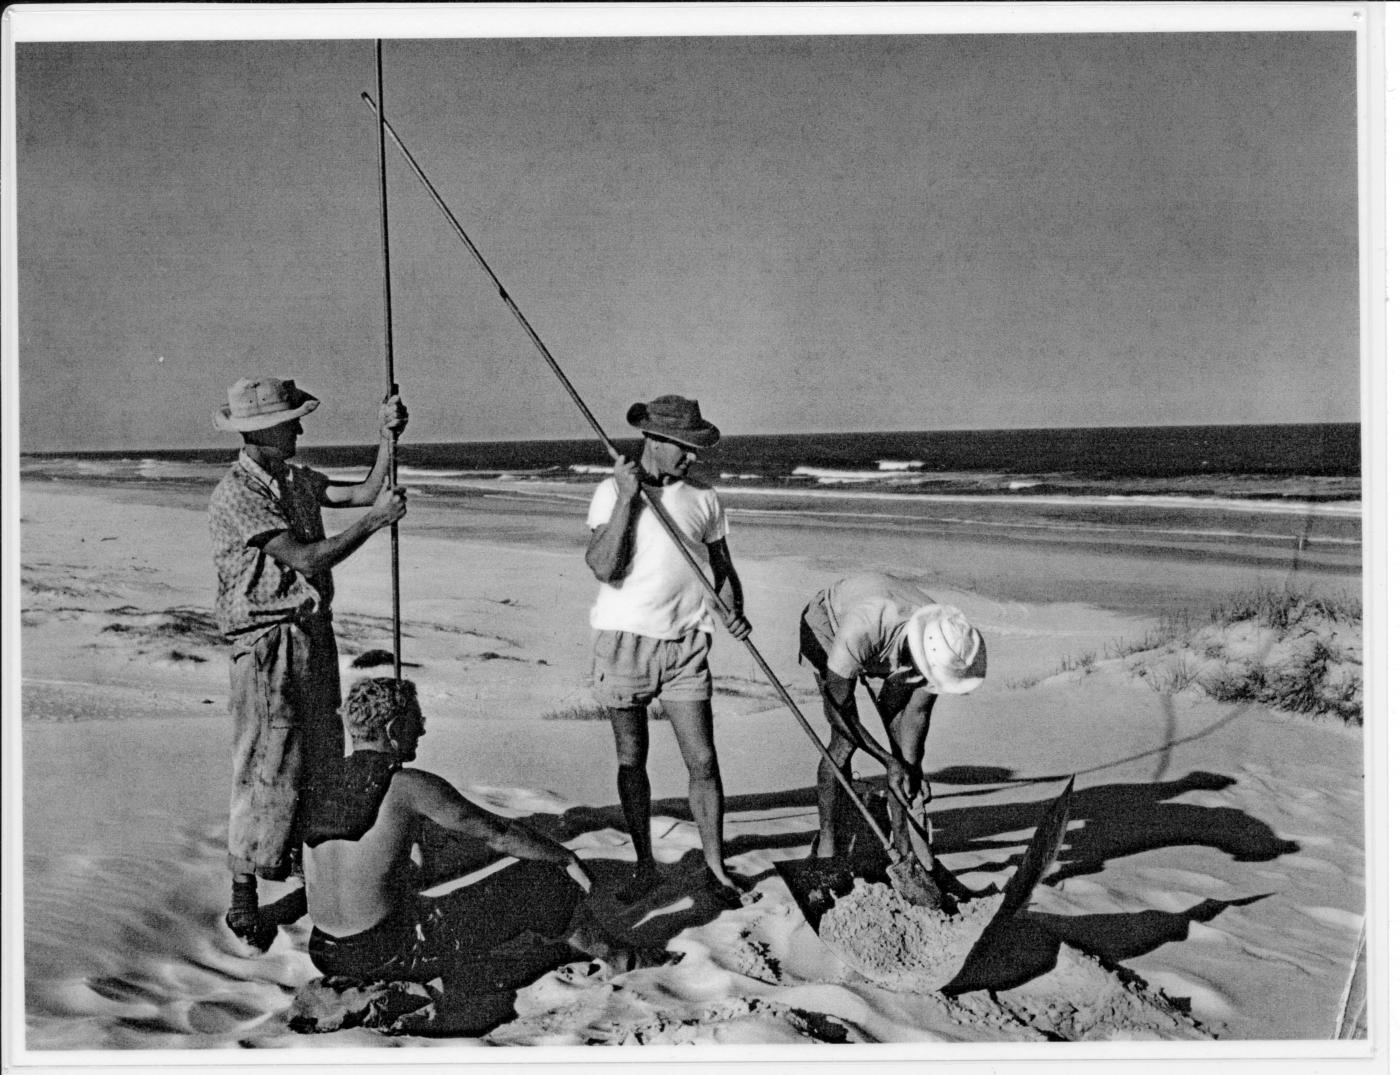 Group of four men working on an ocean beach. Two men are standing, one is sitting and one is bending over handling an implement. The one standing is holding a very long handled post-hole digger and the other standing man holds a long metal rod with the base obscured by the seated figure.